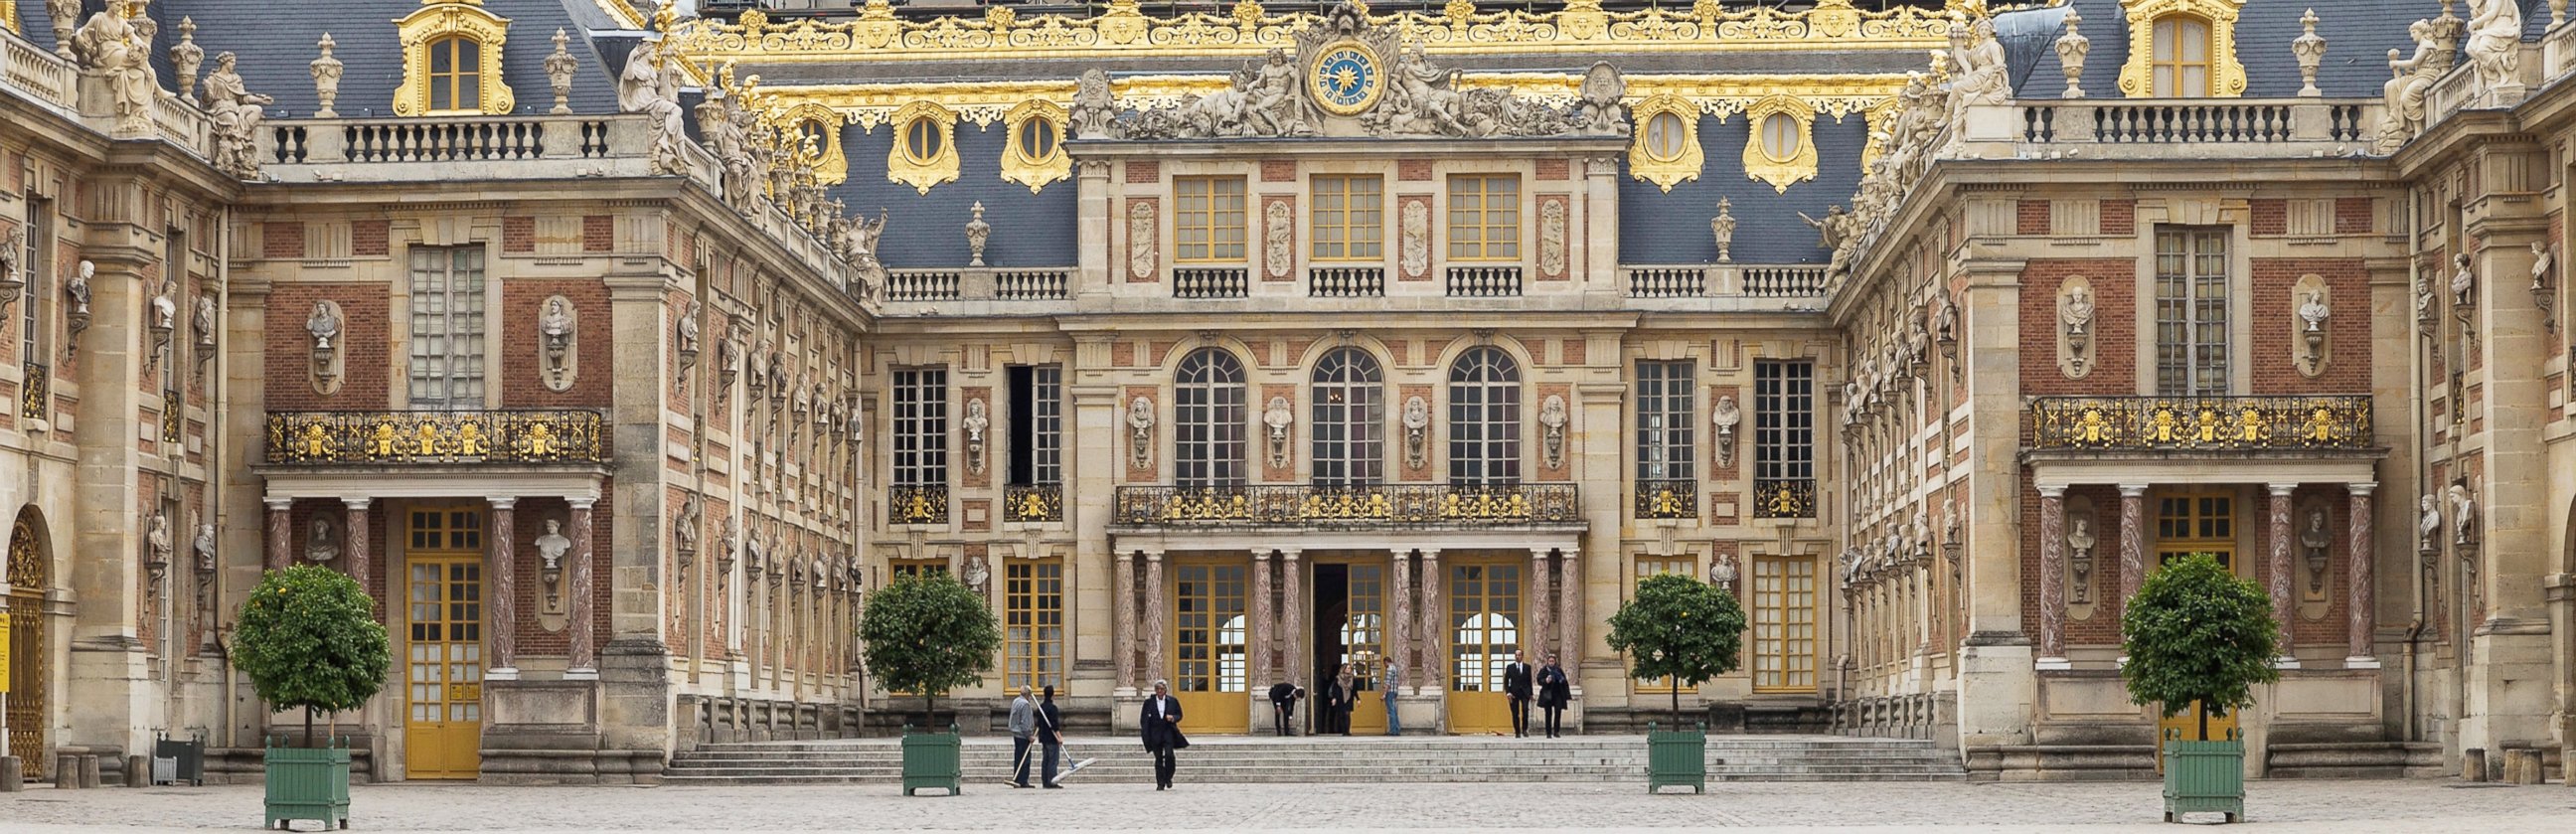 PHOTO: A view of Chateau de Versailles on June 9, 2013 in Versailles, France.